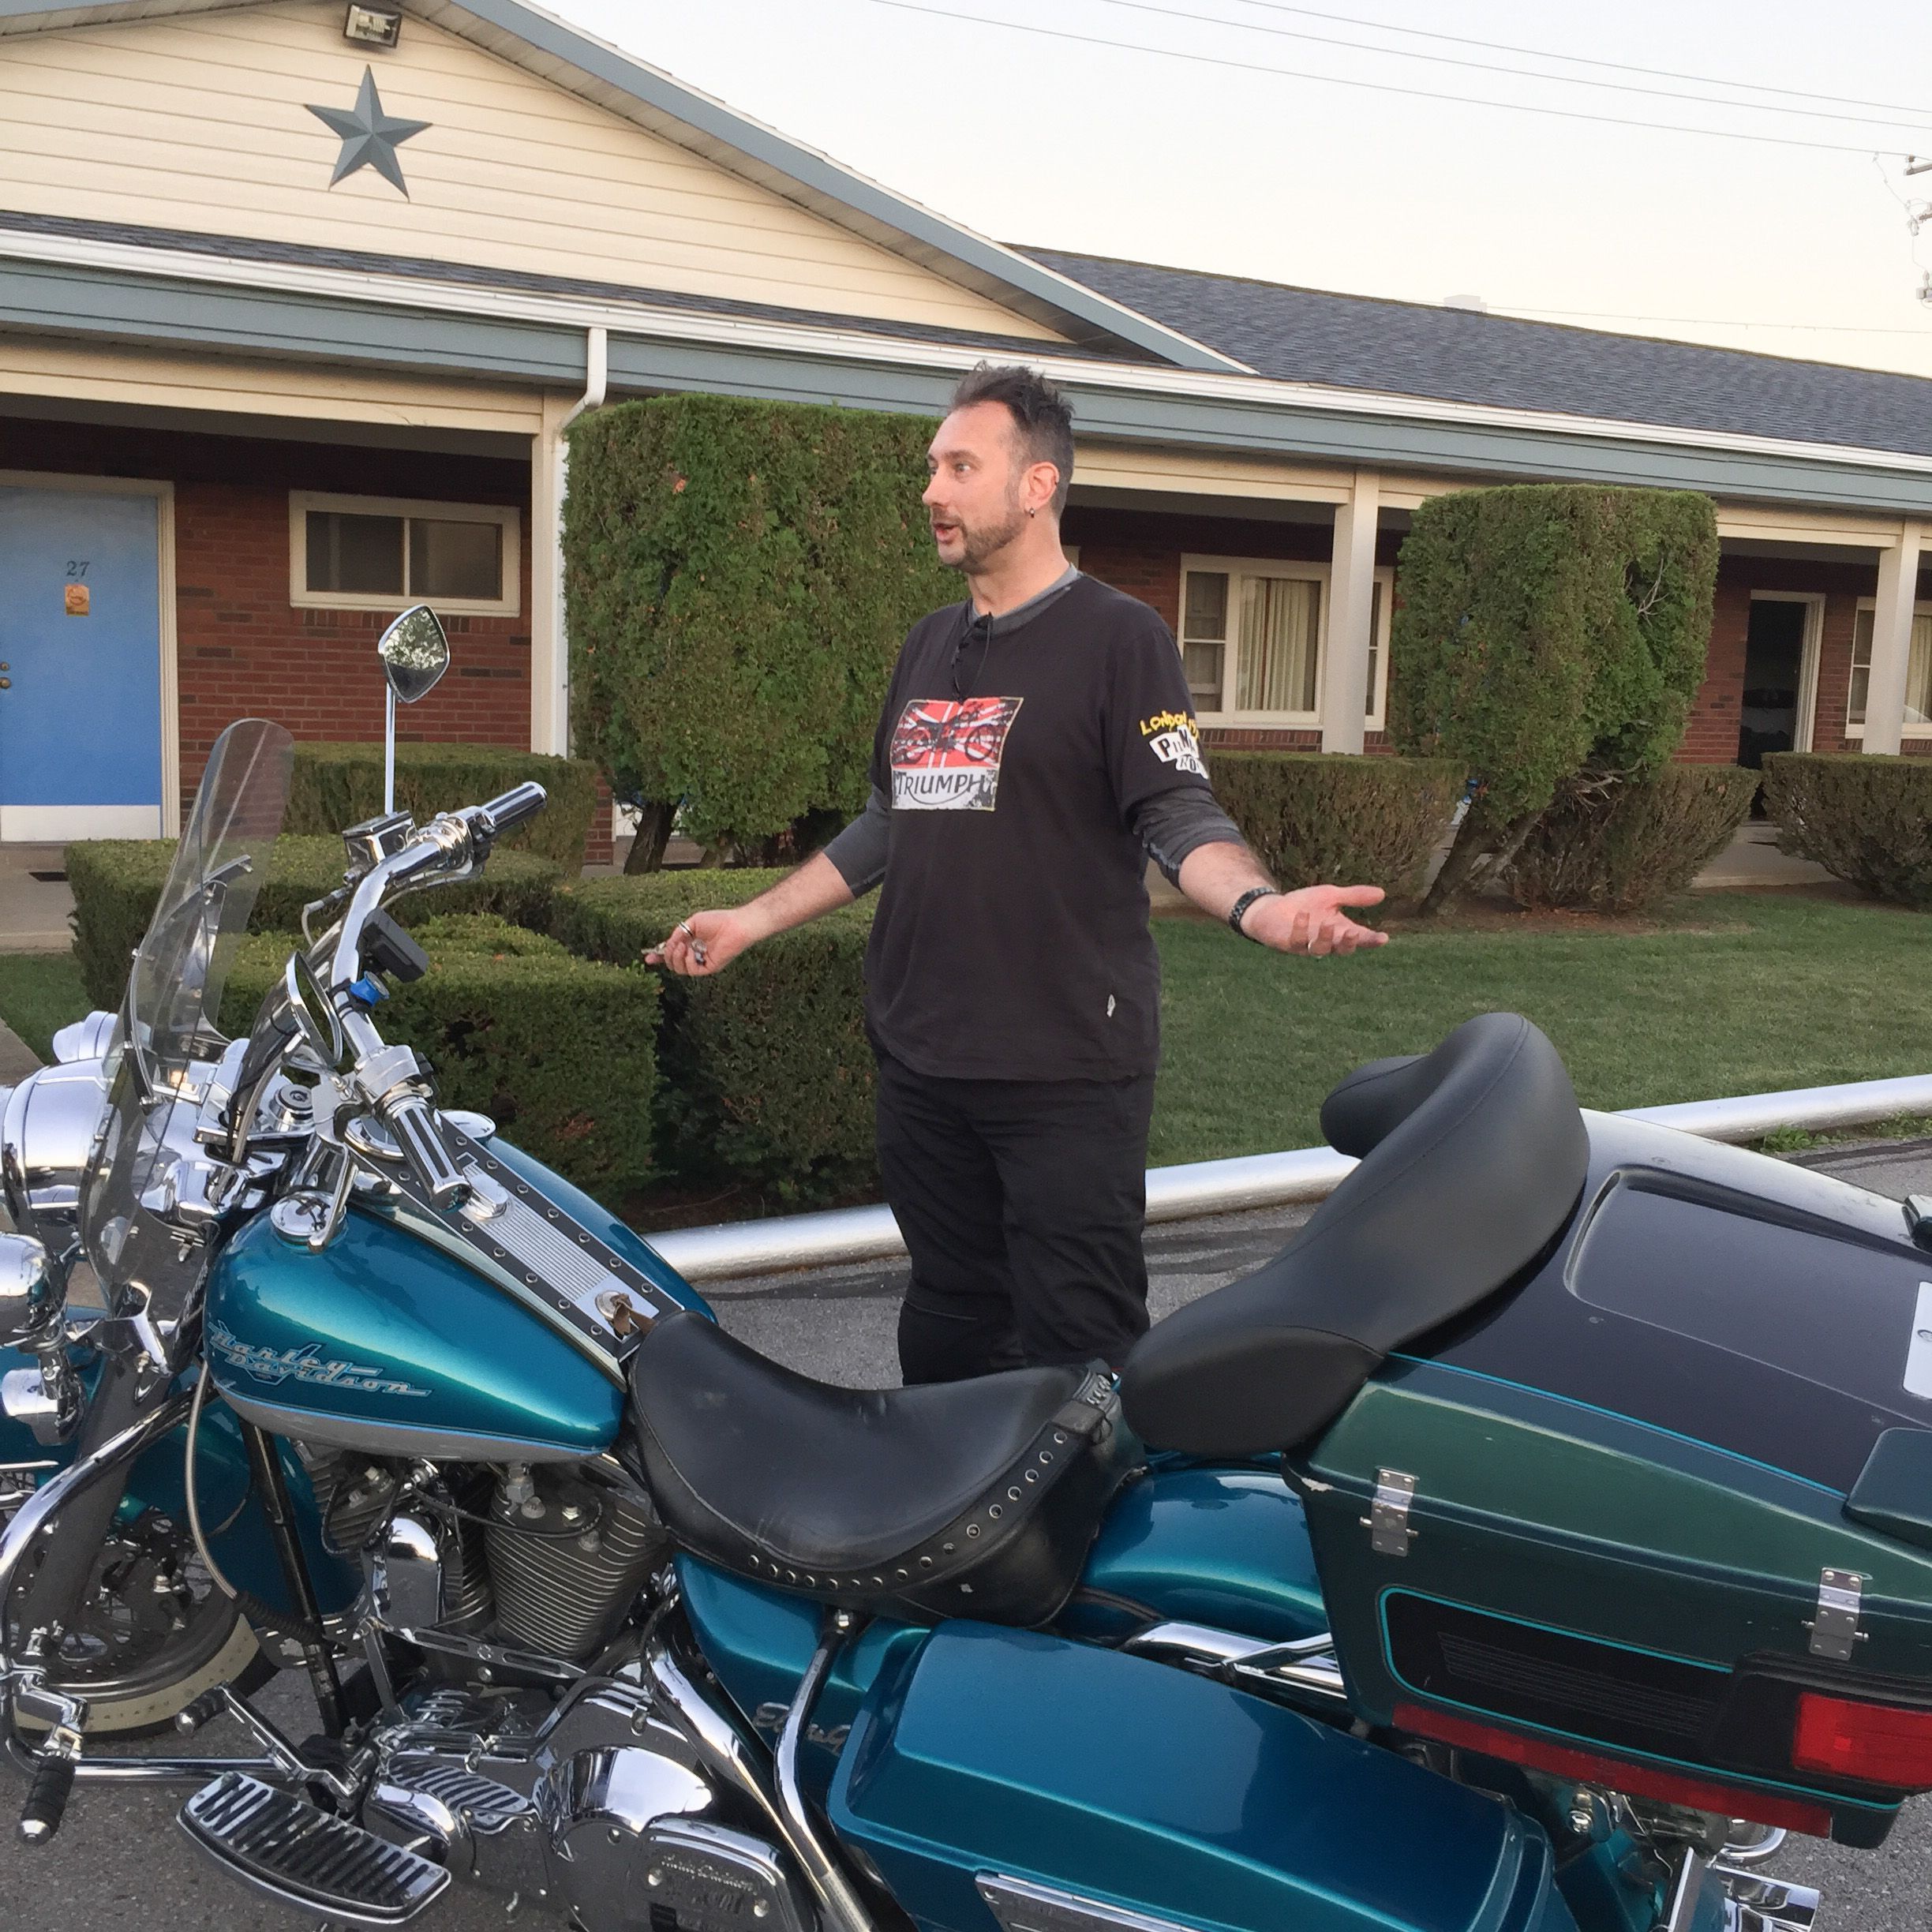 After a long day of riding; Alex was ready and willing for more, he took the Road King for a beer run